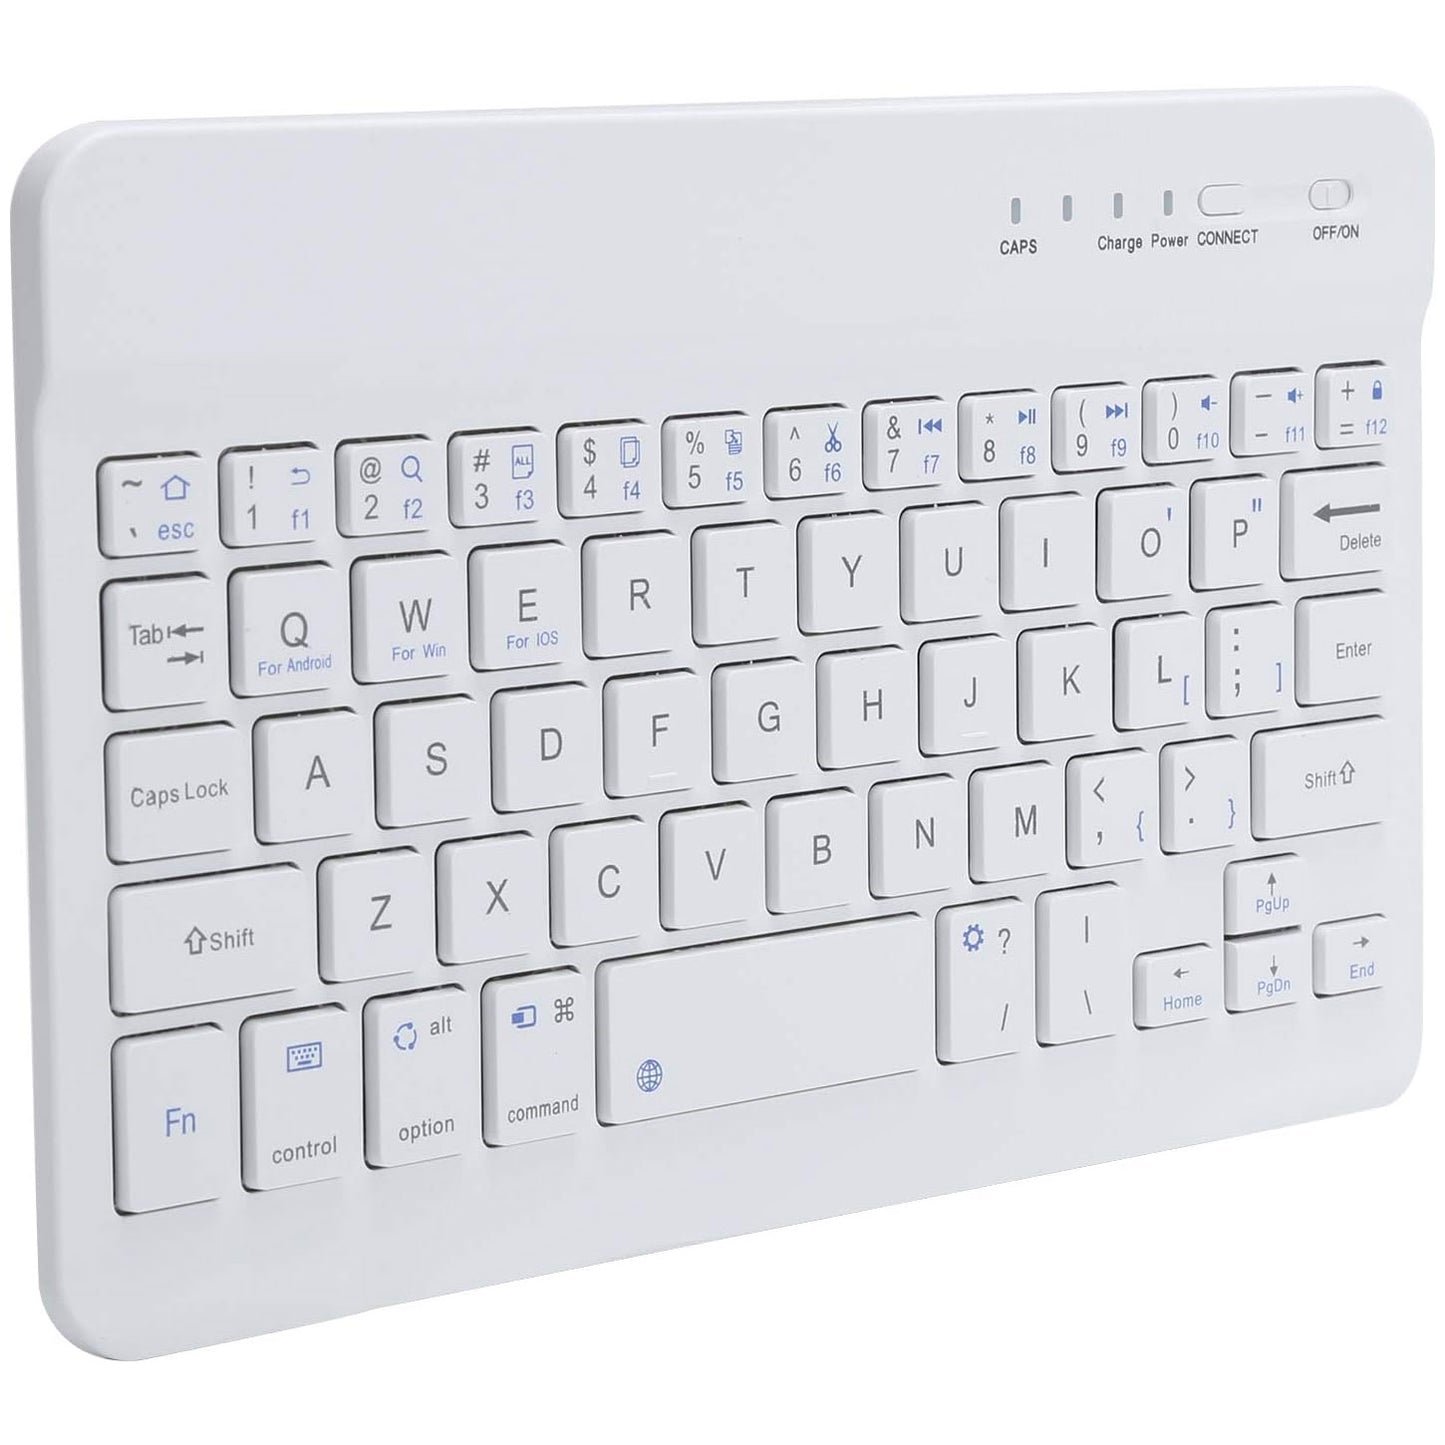  Wireless Keyboard ,  Compact Portable  Rechargeable   Ultra Slim   - NWS79 2053-1